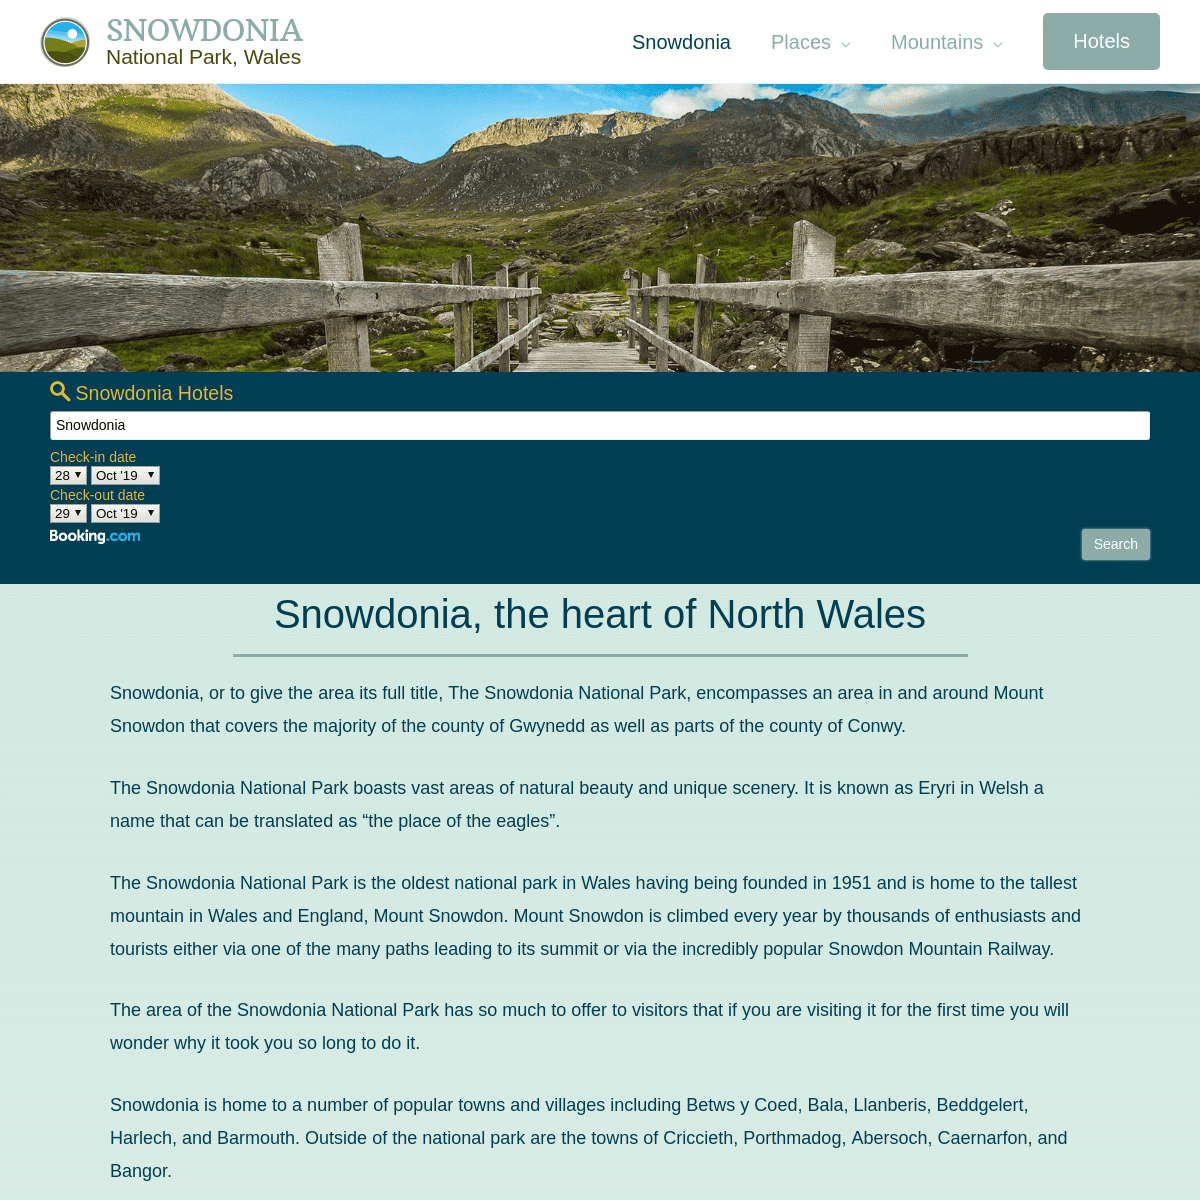 A complete backup of snowdoniatourism.co.uk